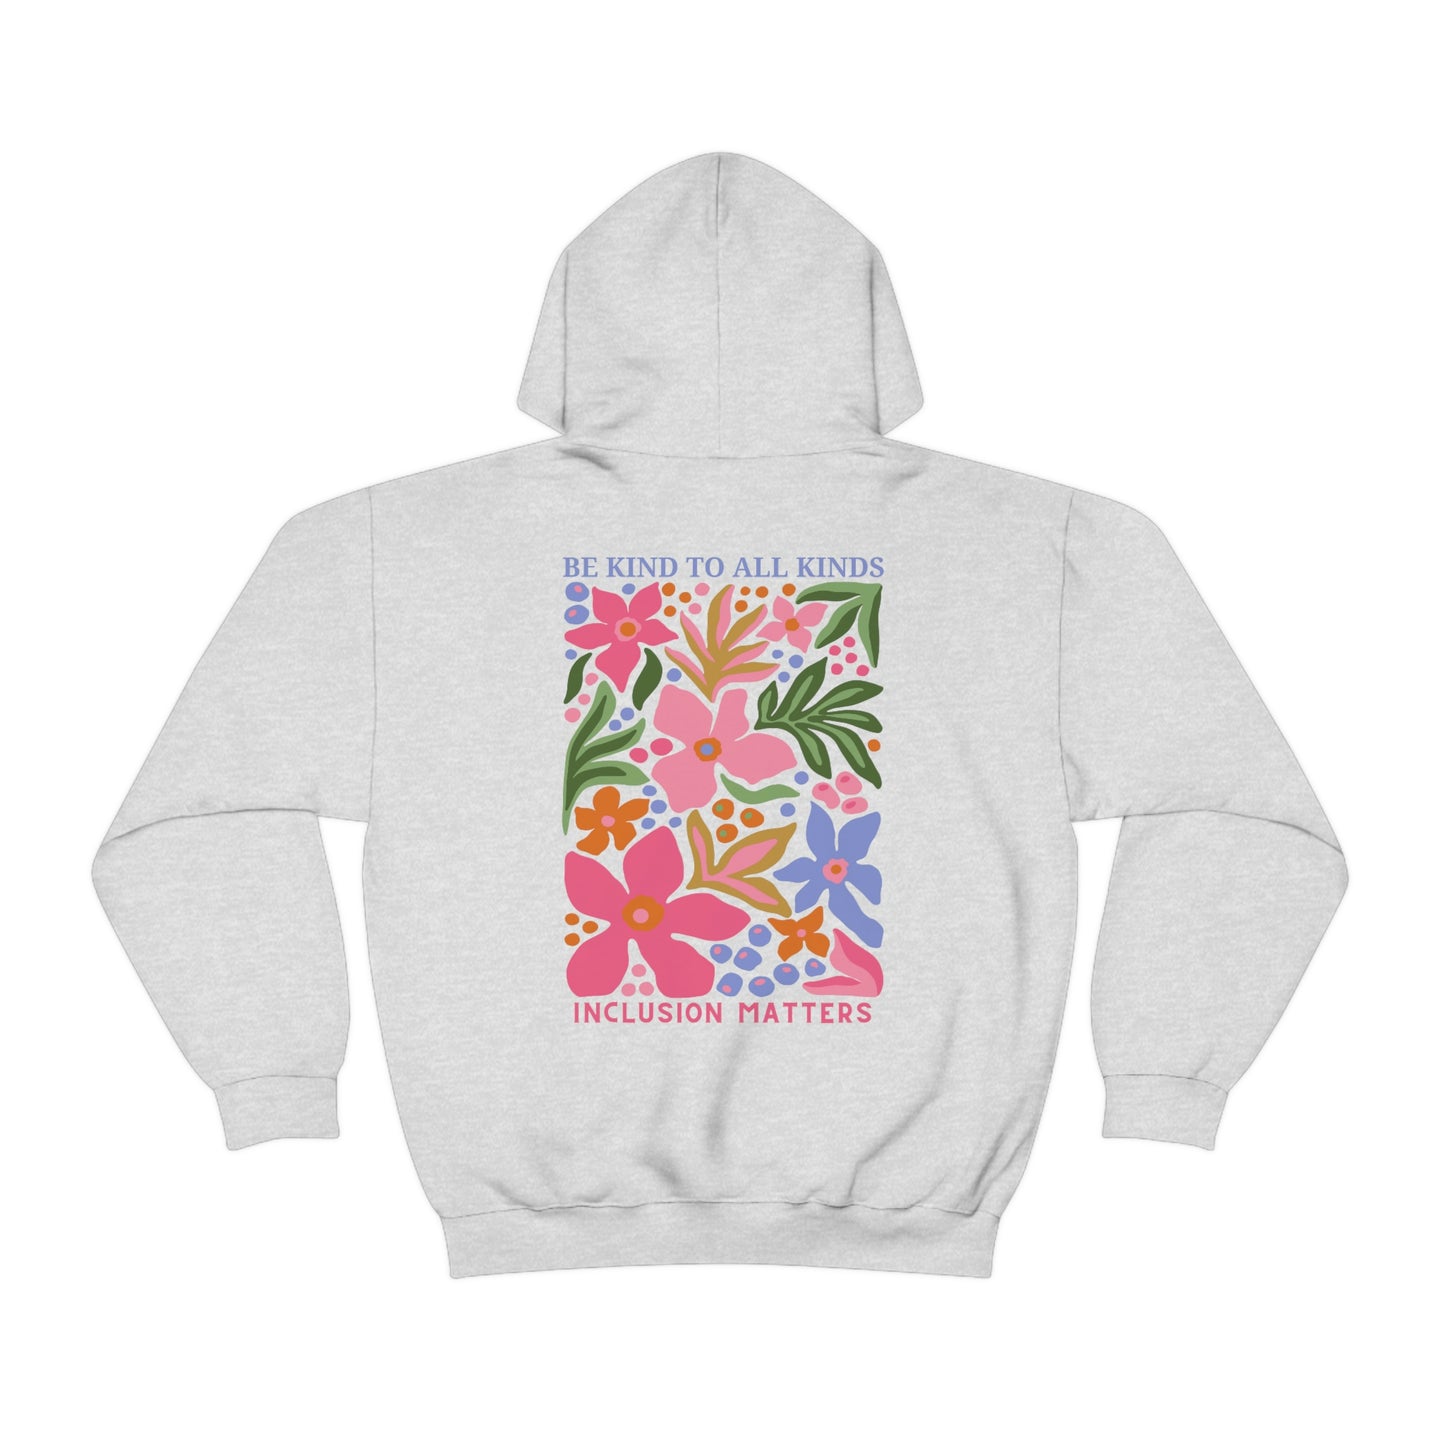 Be Kind to All Kinds Hoodie | Front and Back Print